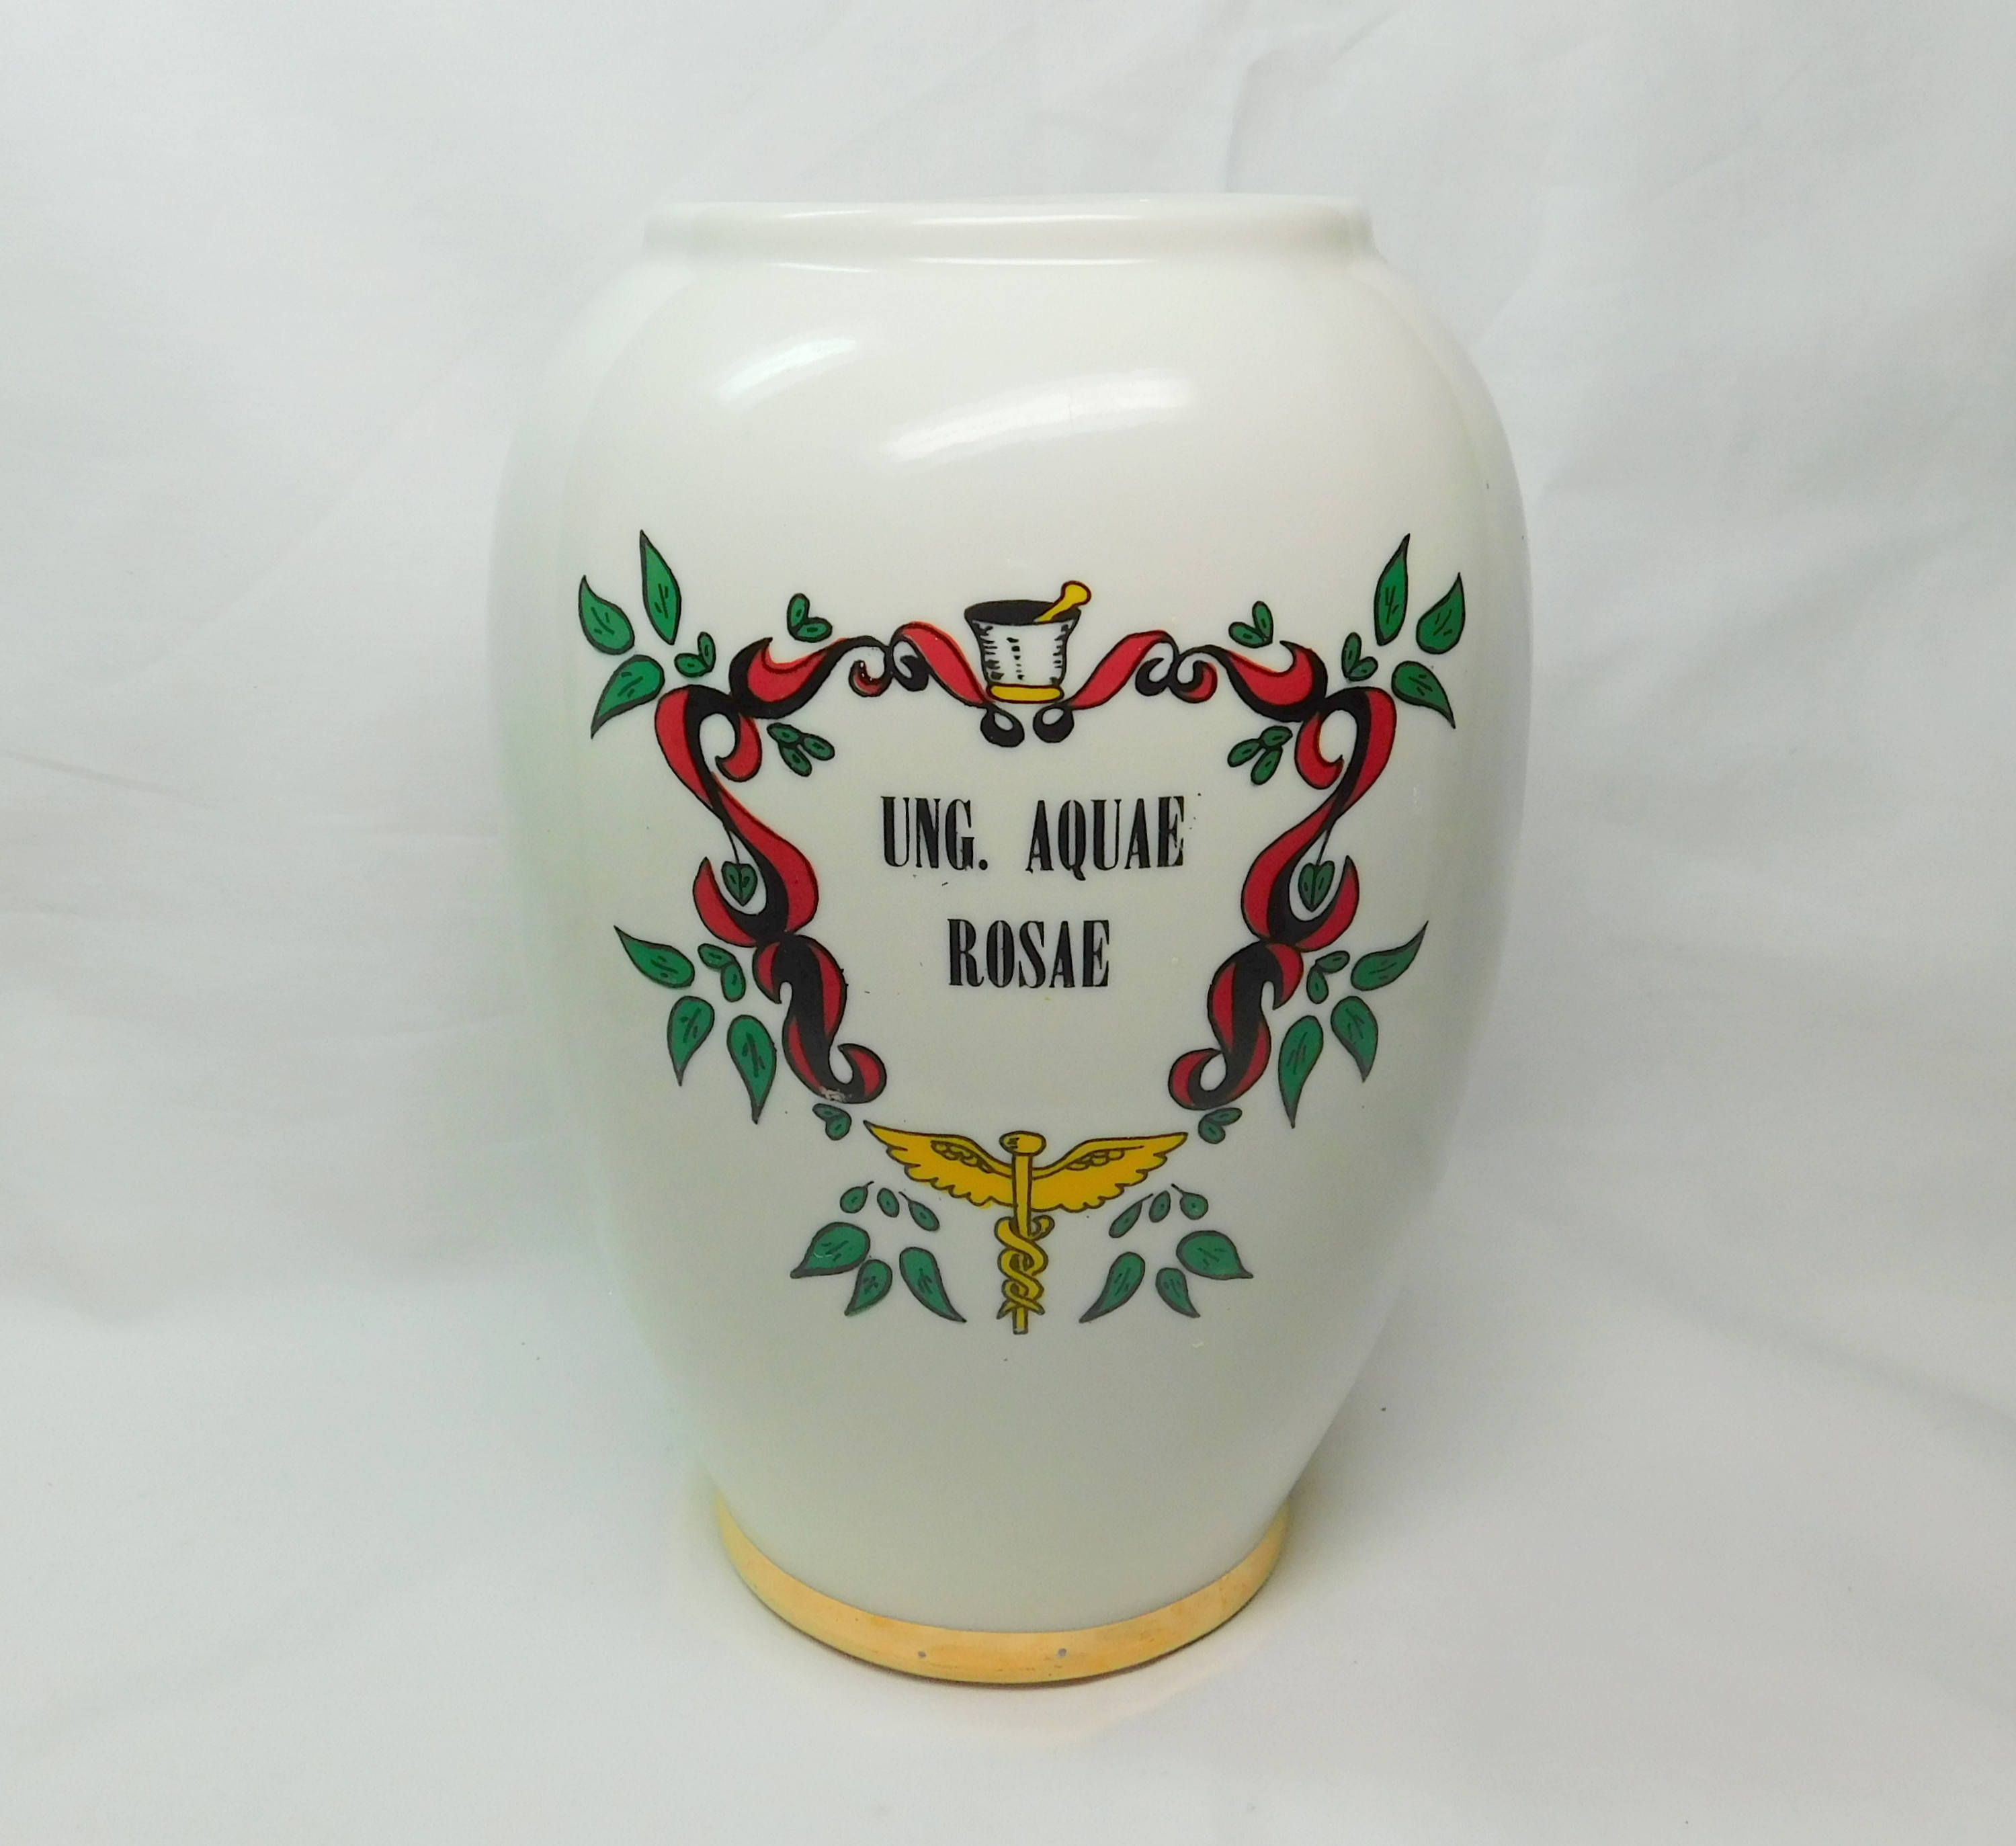 14 Fashionable Porcelain Vases for Sale 2024 free download porcelain vases for sale of 43 lenox vase with gold trim the weekly world regarding vintage fashioned by blair apothecary porcelain vase latin ung